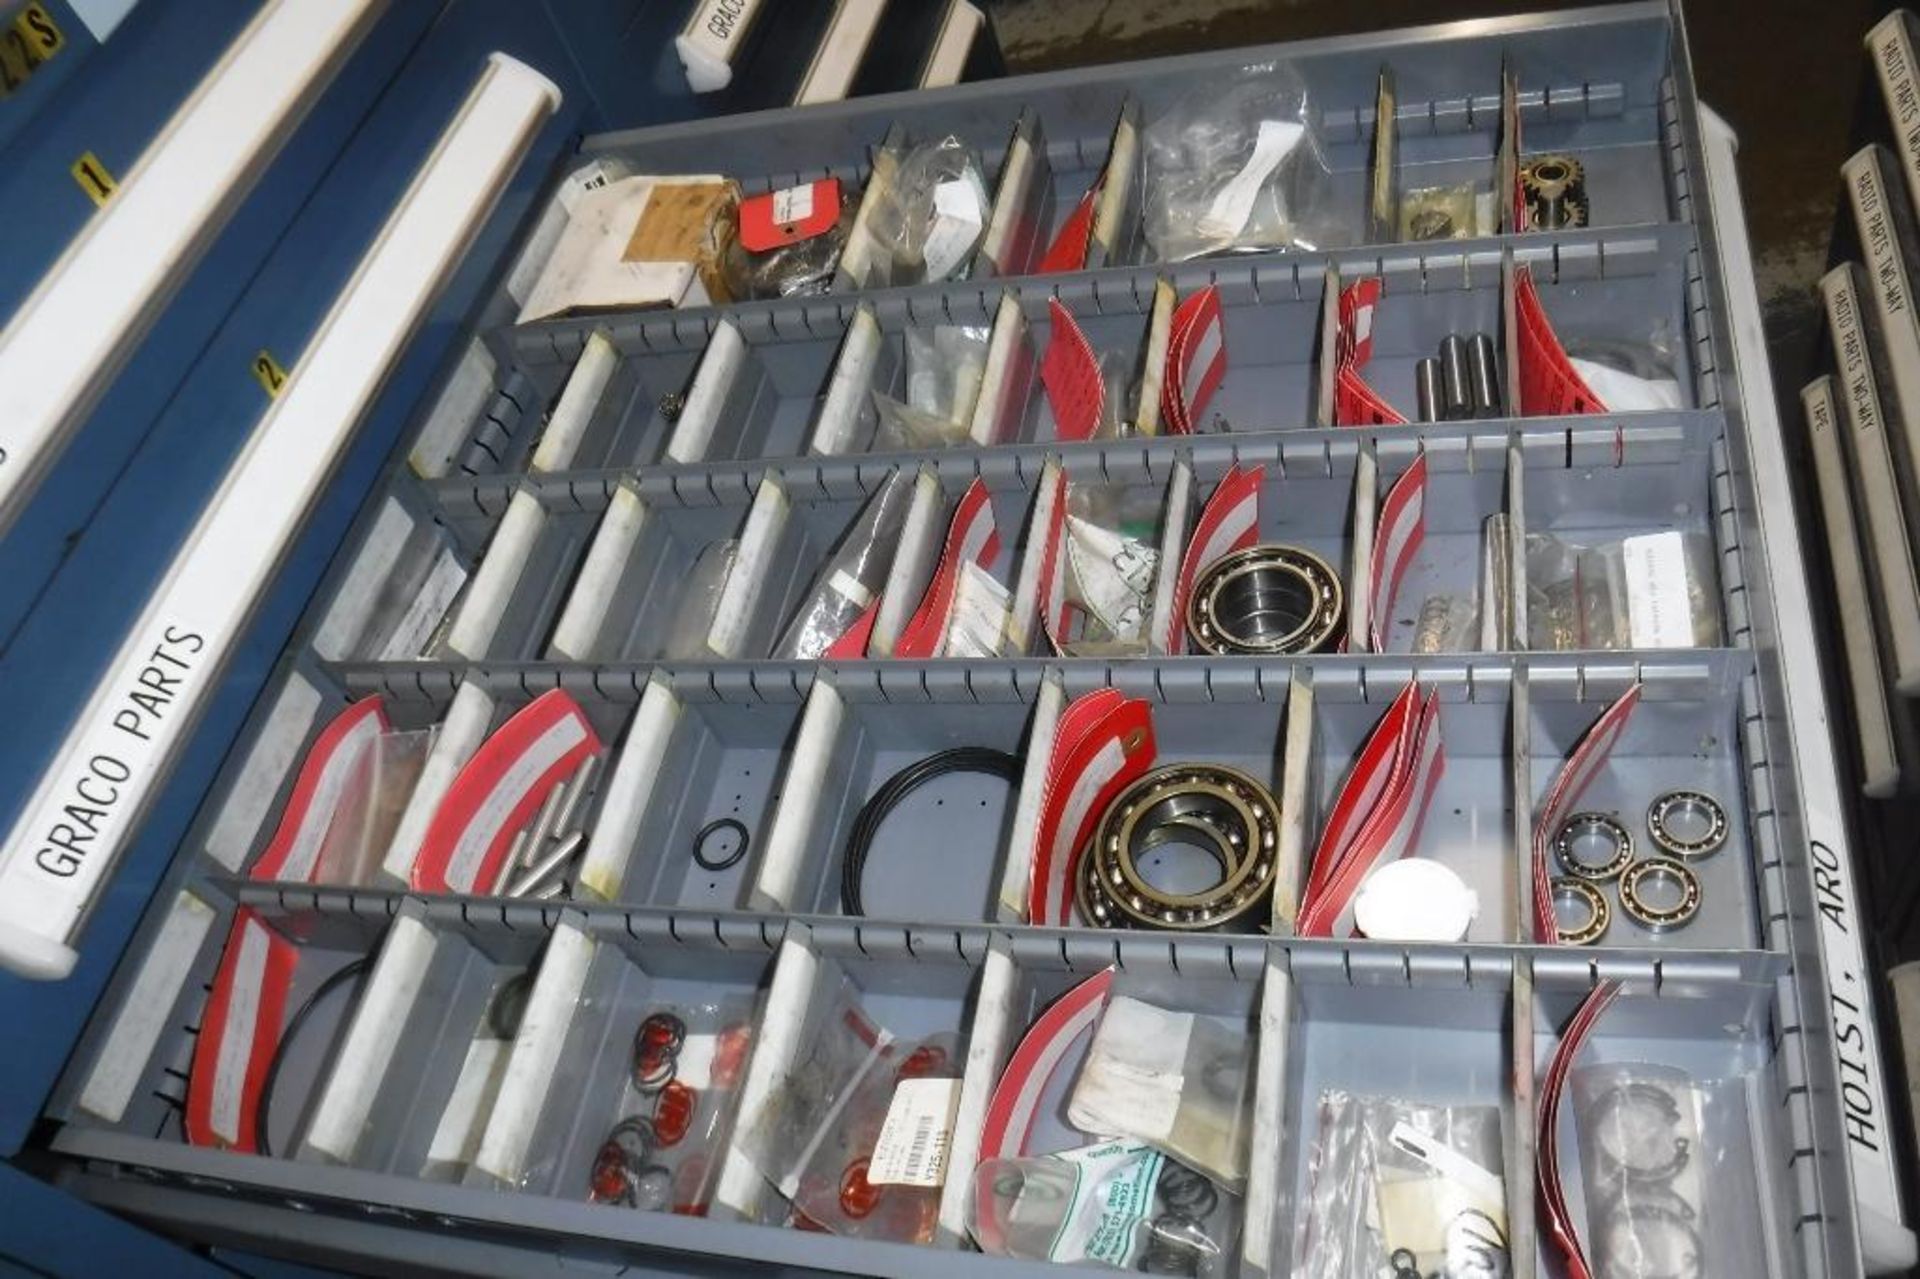 9-Drawer Vidmar Cabinet with Contents-Graco Parts,Hoist Parts,Pump Parts, MUST REMOVE BY 2/14/20-MUS - Image 9 of 12